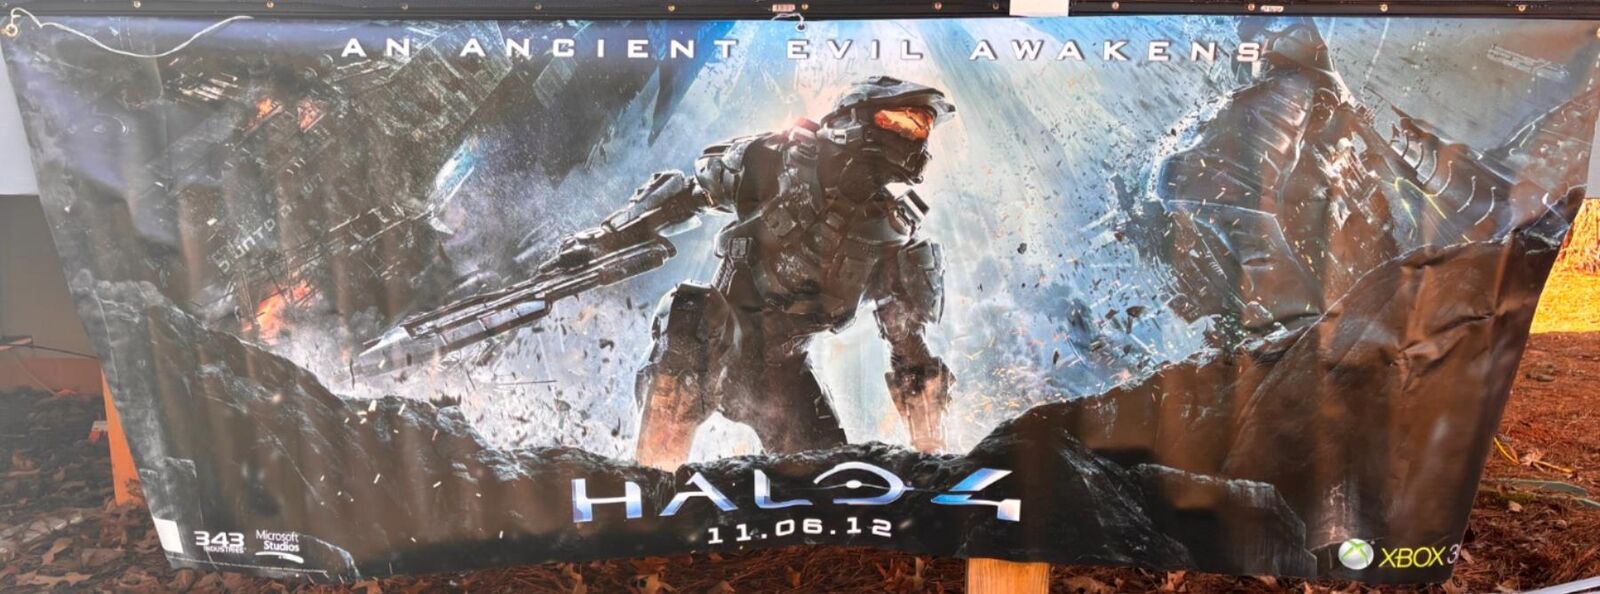 Halo 4 Launch Store Double Sided Vinyl Banner 8’x3’